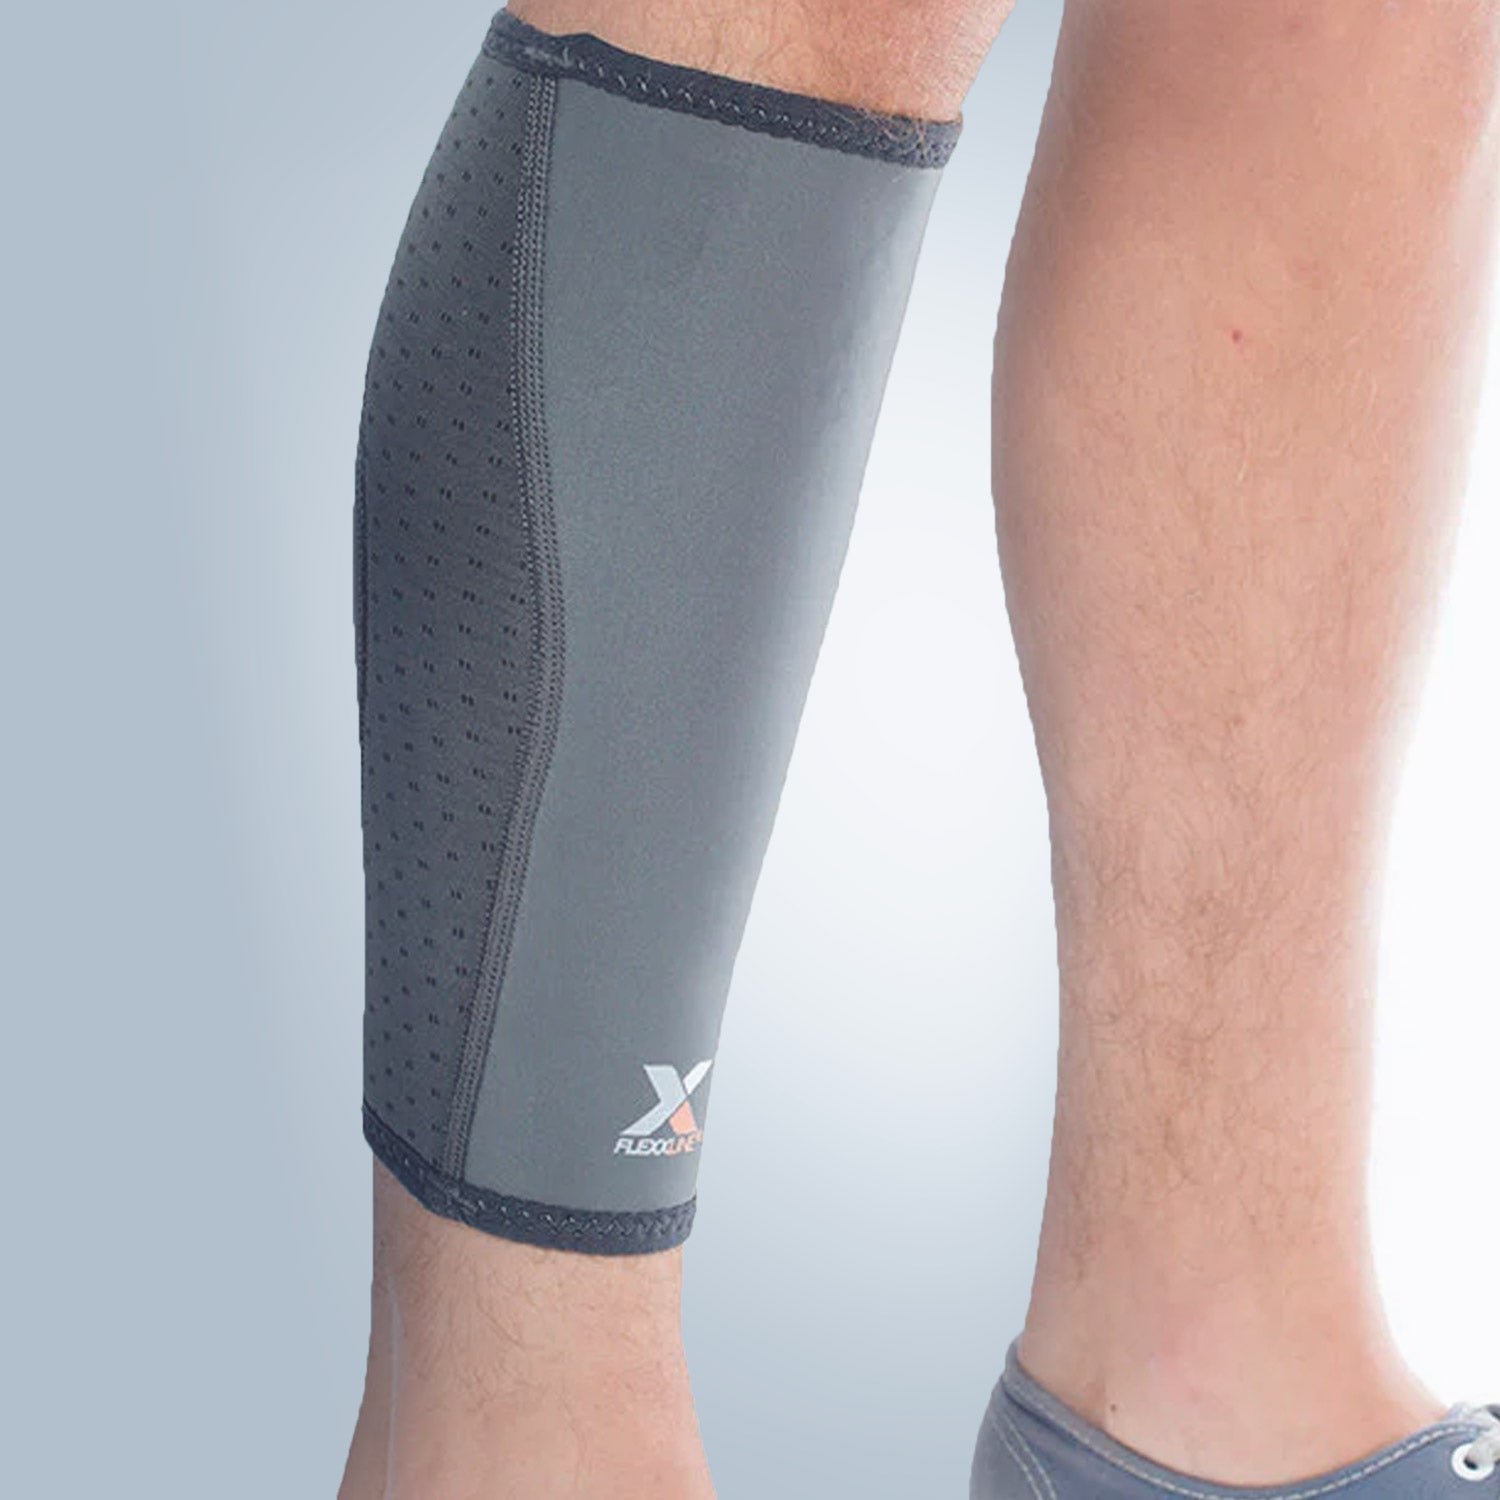 Benefits of Wearing Compression Calf Sleeves